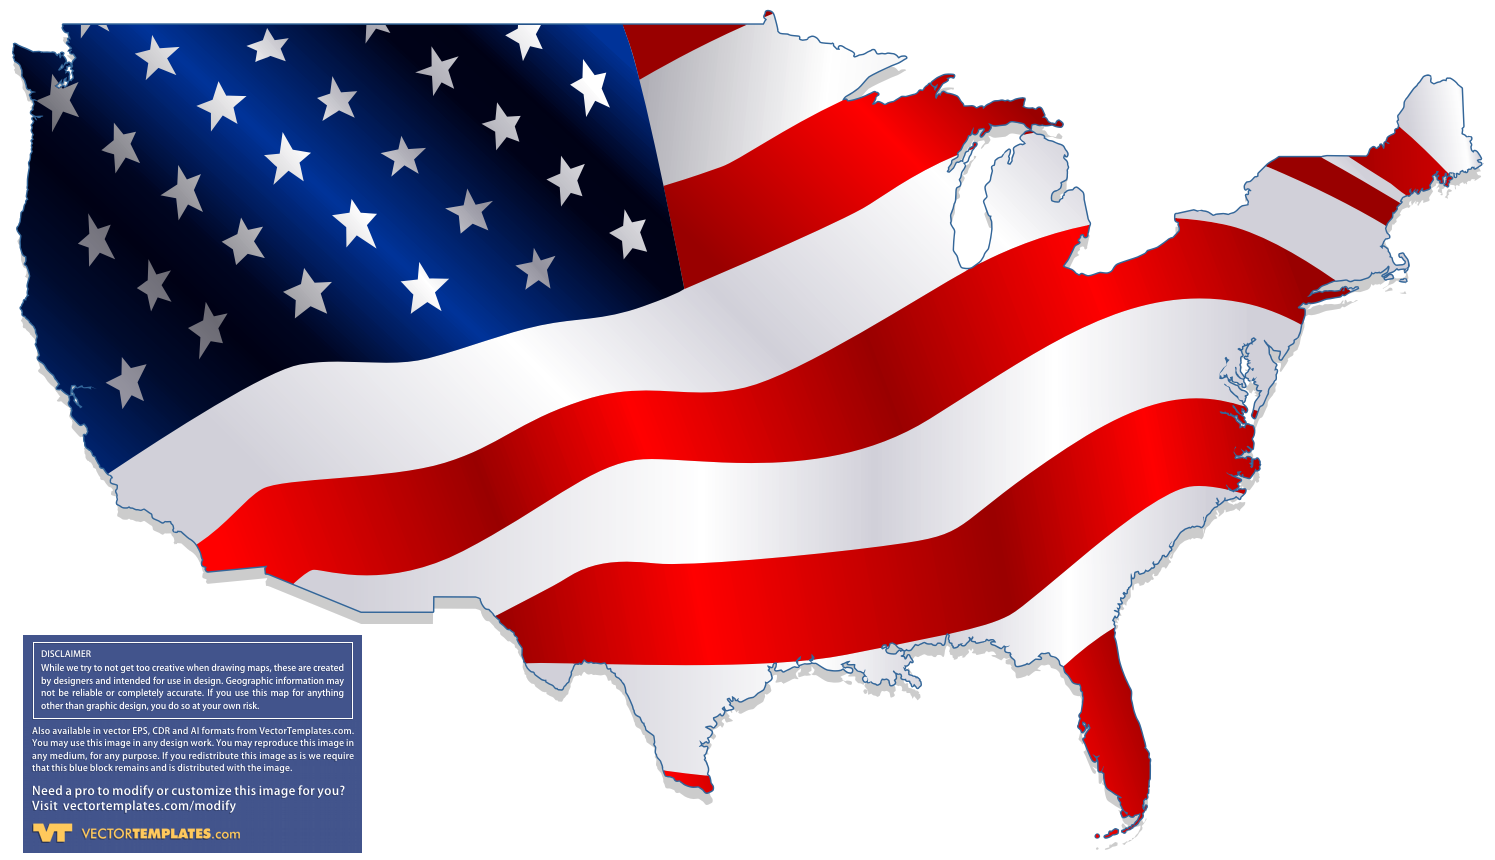 Vector United States Outline - ClipArt Best